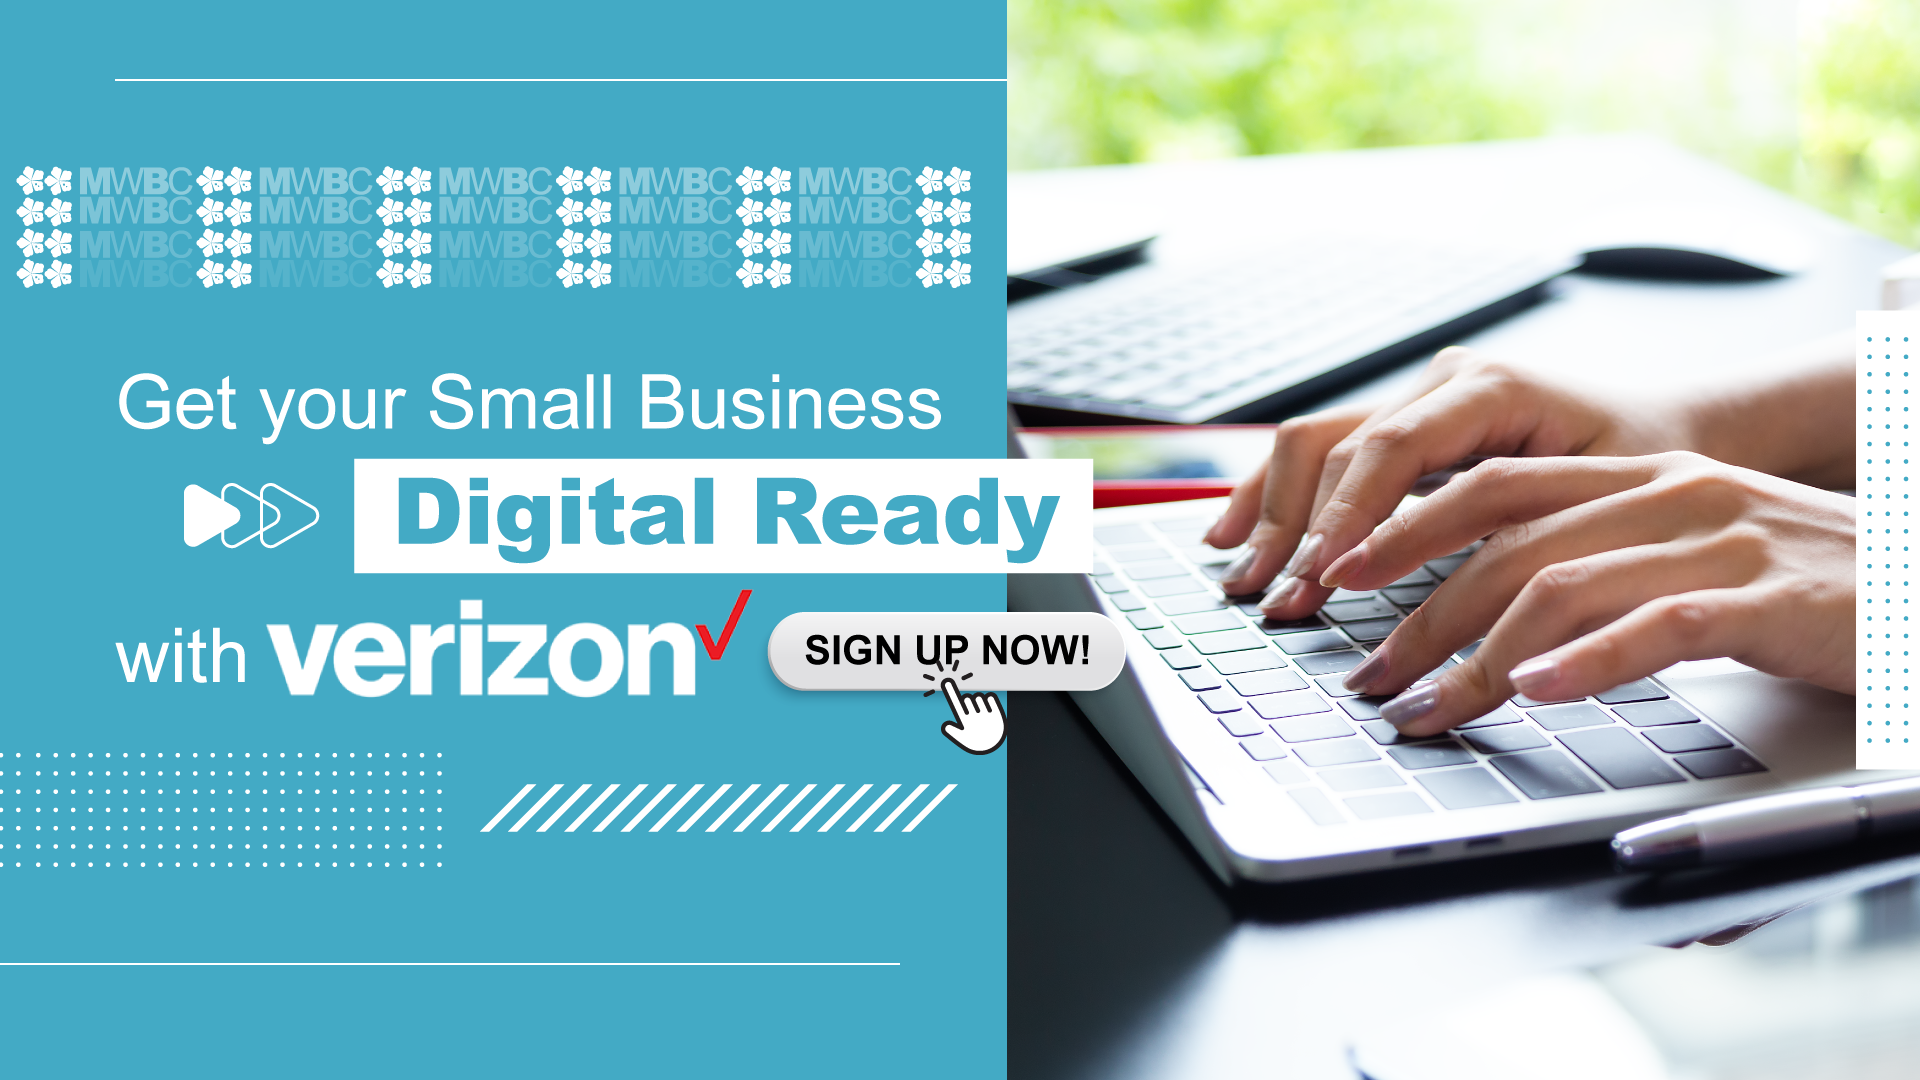 Get your Small Business Digital Ready with Verizon